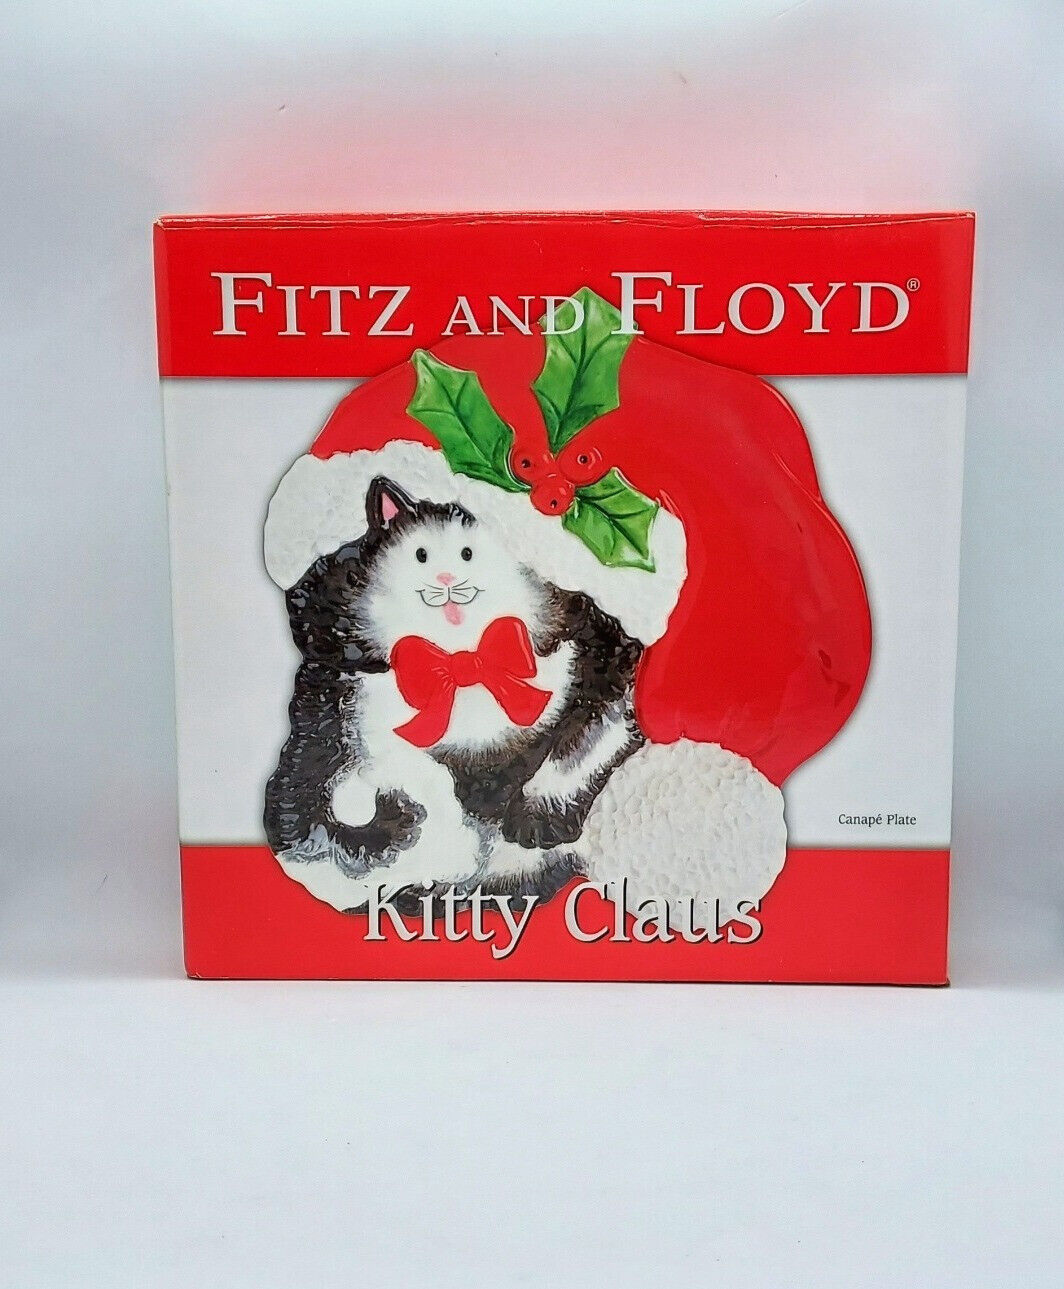 2006 Fitz and Floyd Kitty Claus Canape Plate